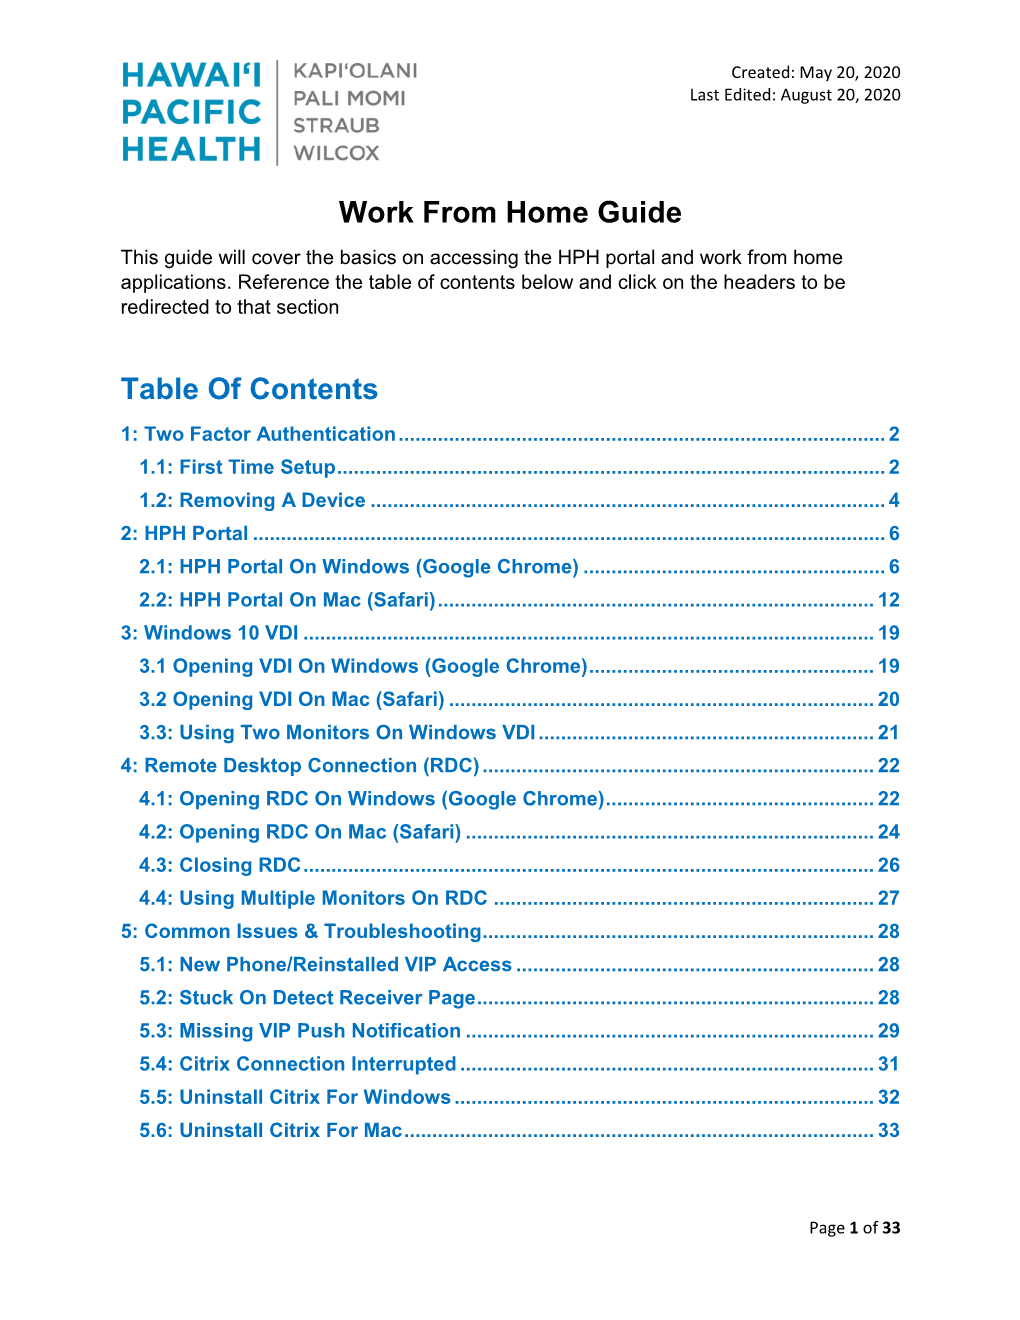 Work from Home Guide Table of Contents